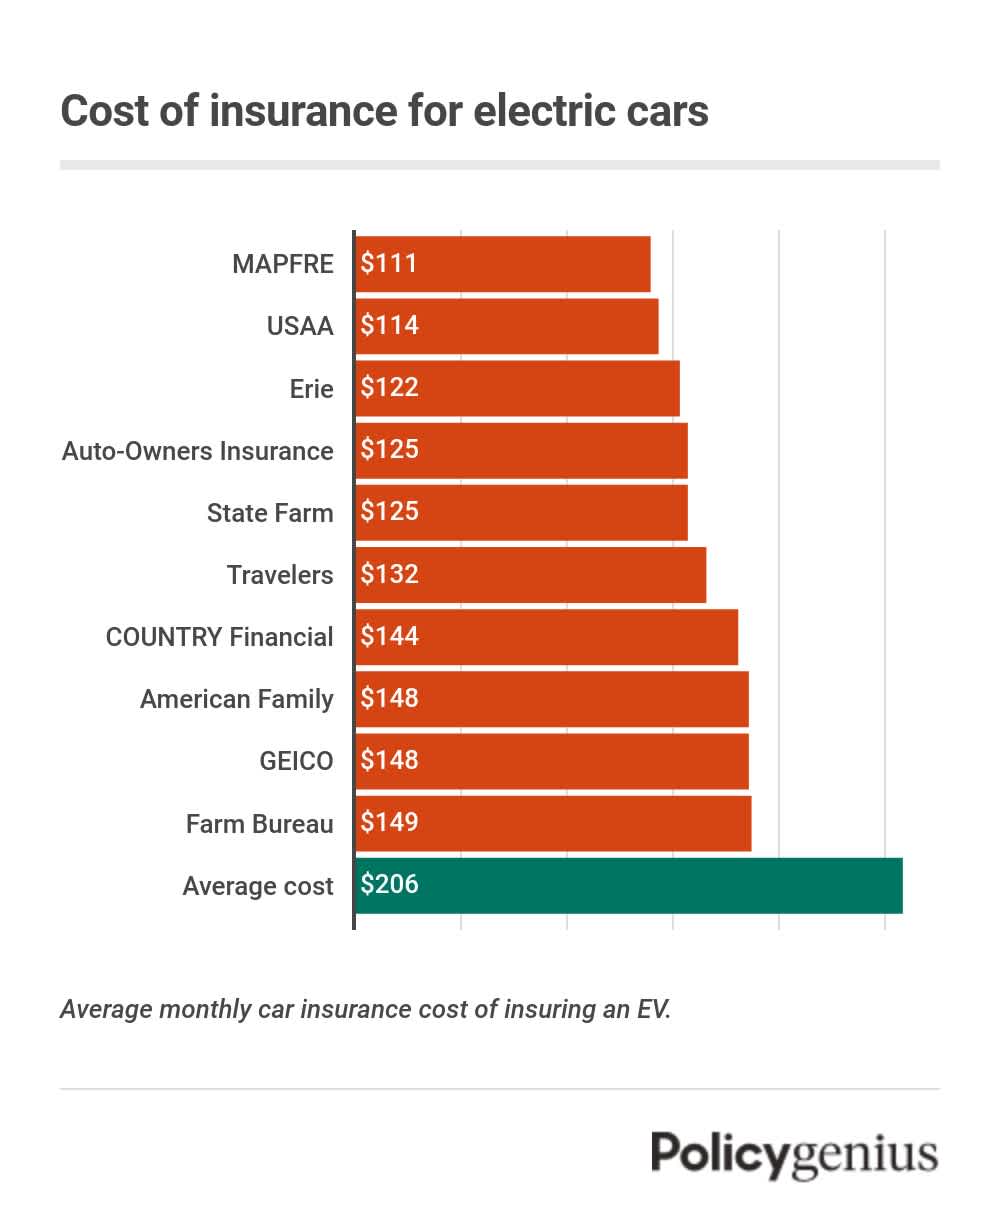 Cost of insurance for EVs